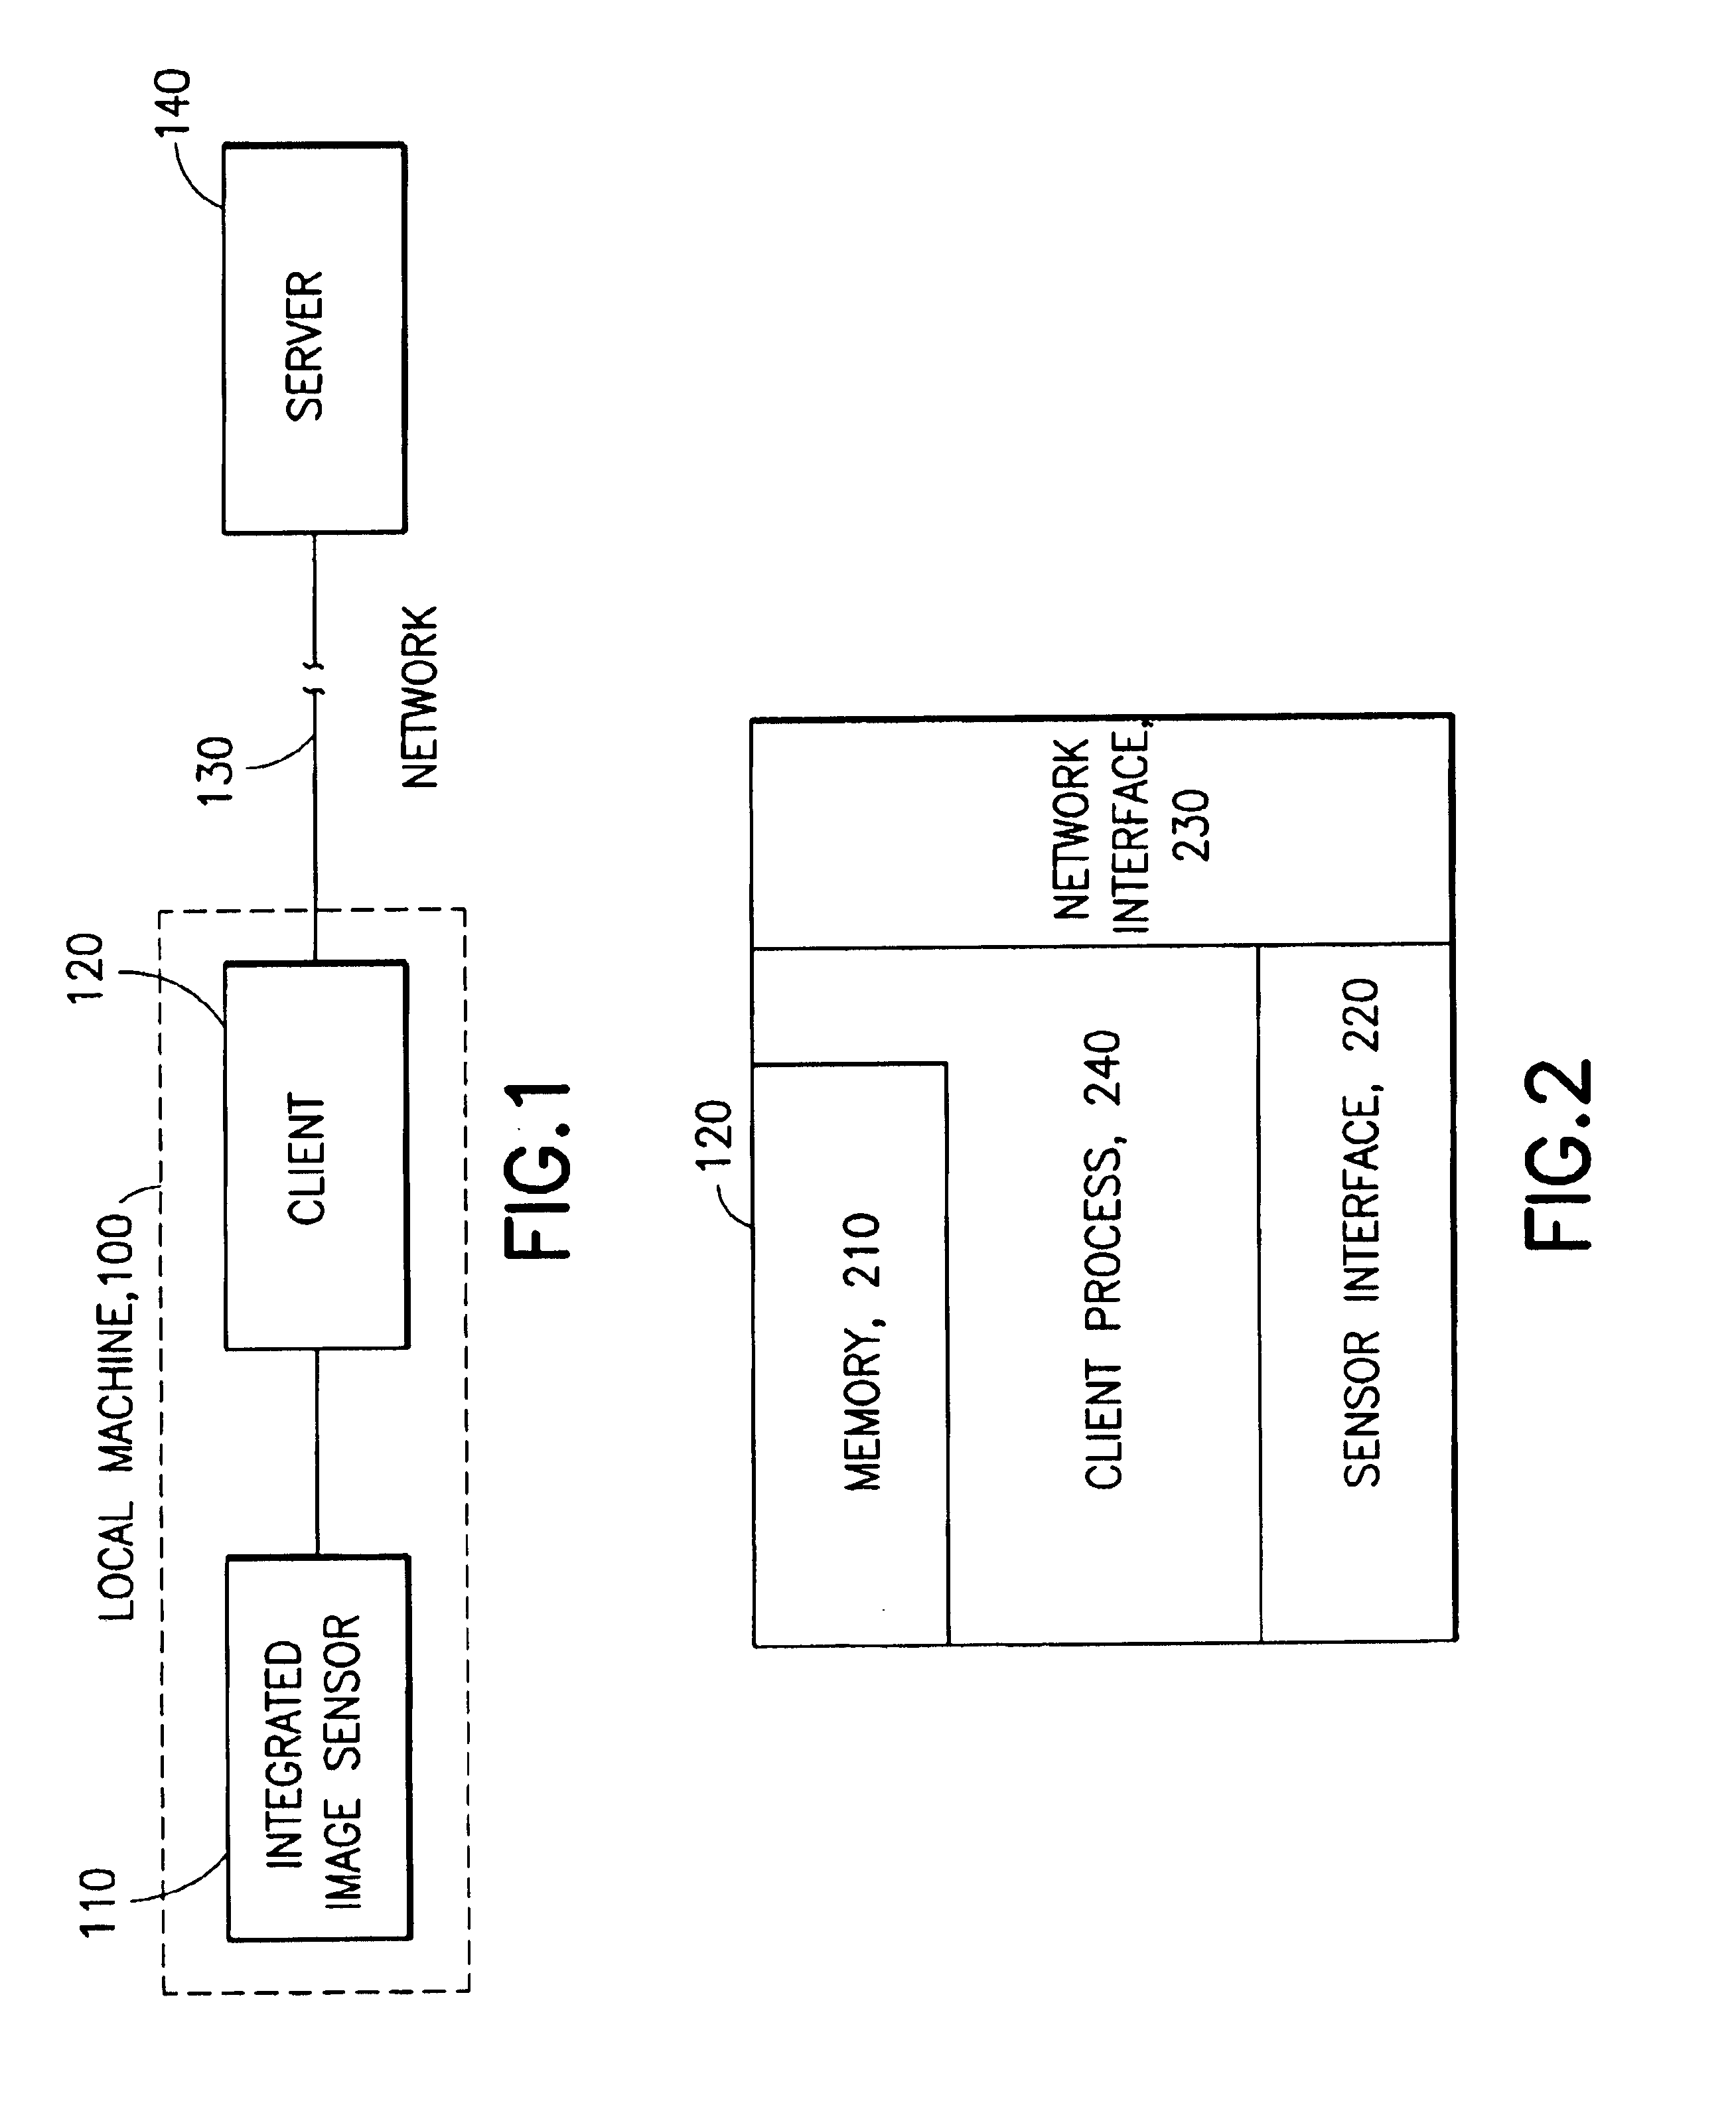 System and method for liveness authentication using an augmented challenge/response scheme